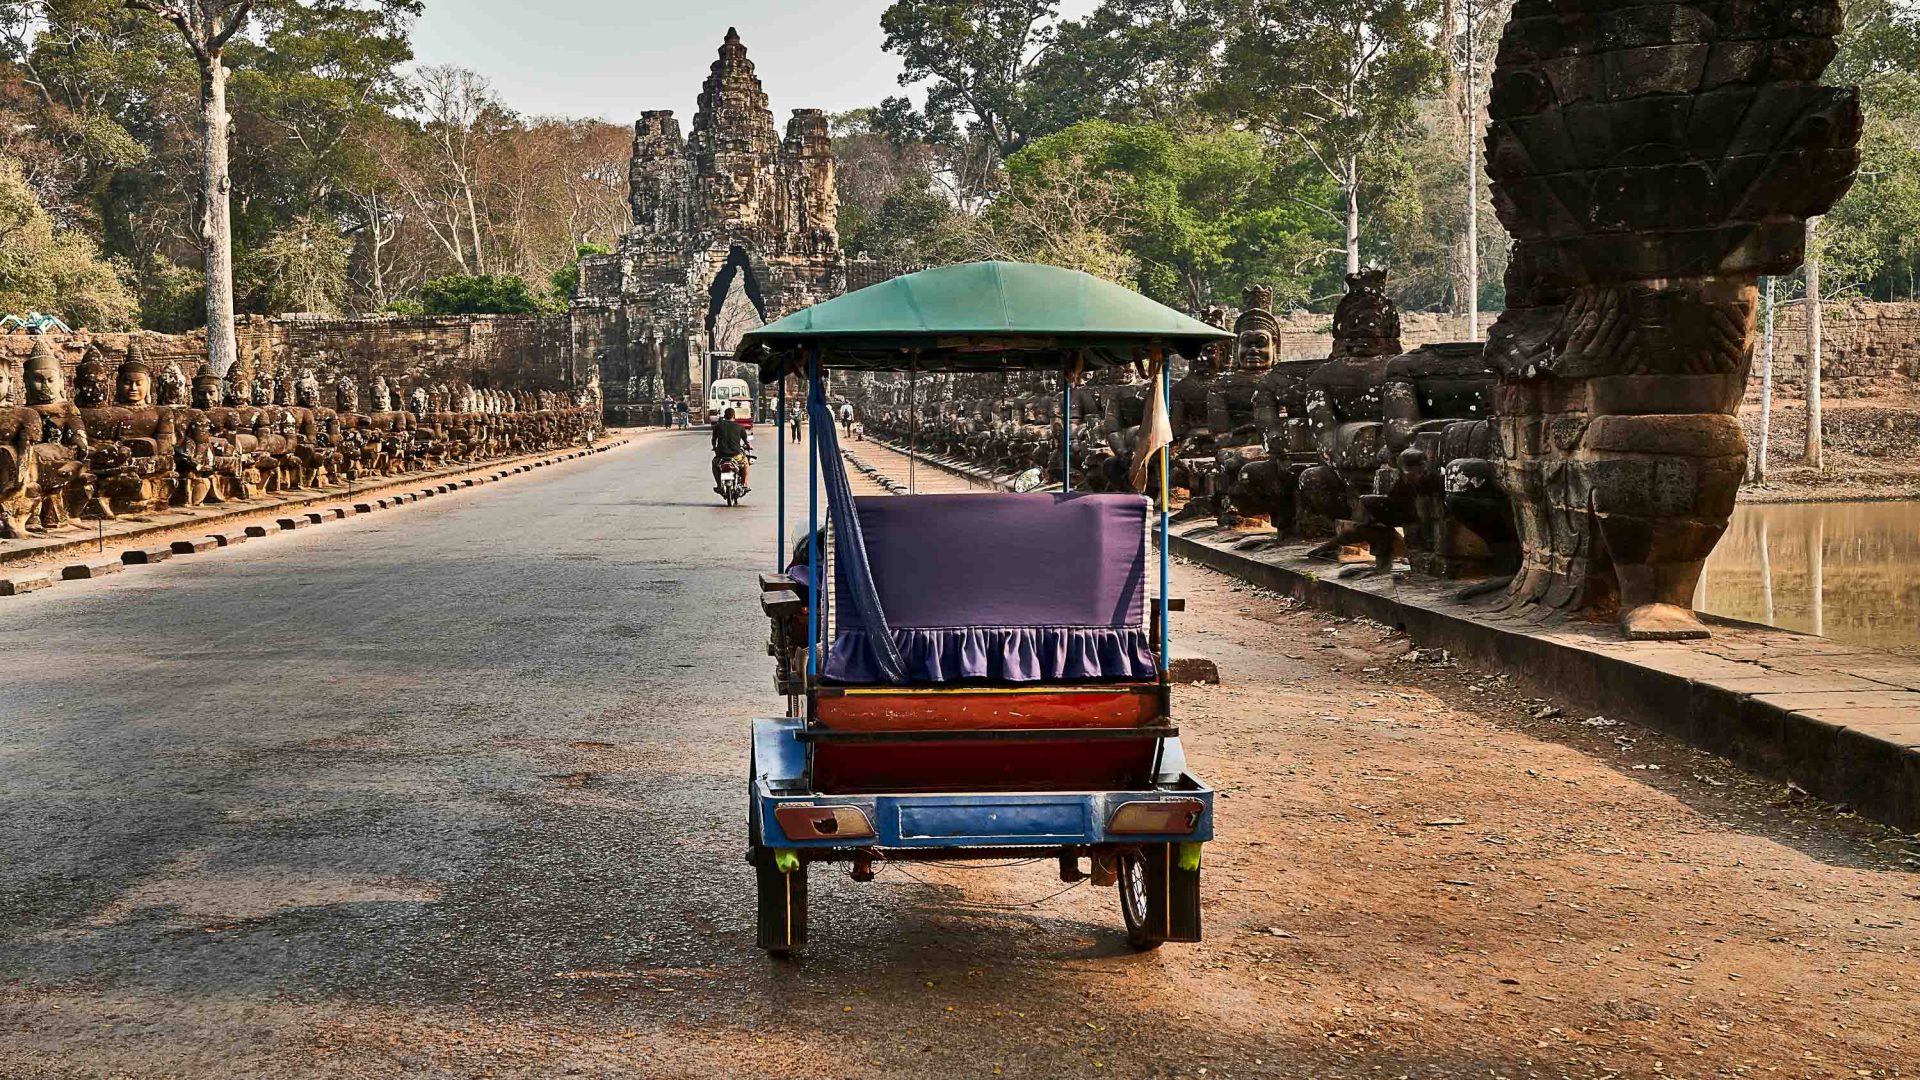 Competition or camaraderie? Inside the tight-knit community of Siem Reap’s tuk-tuk drivers